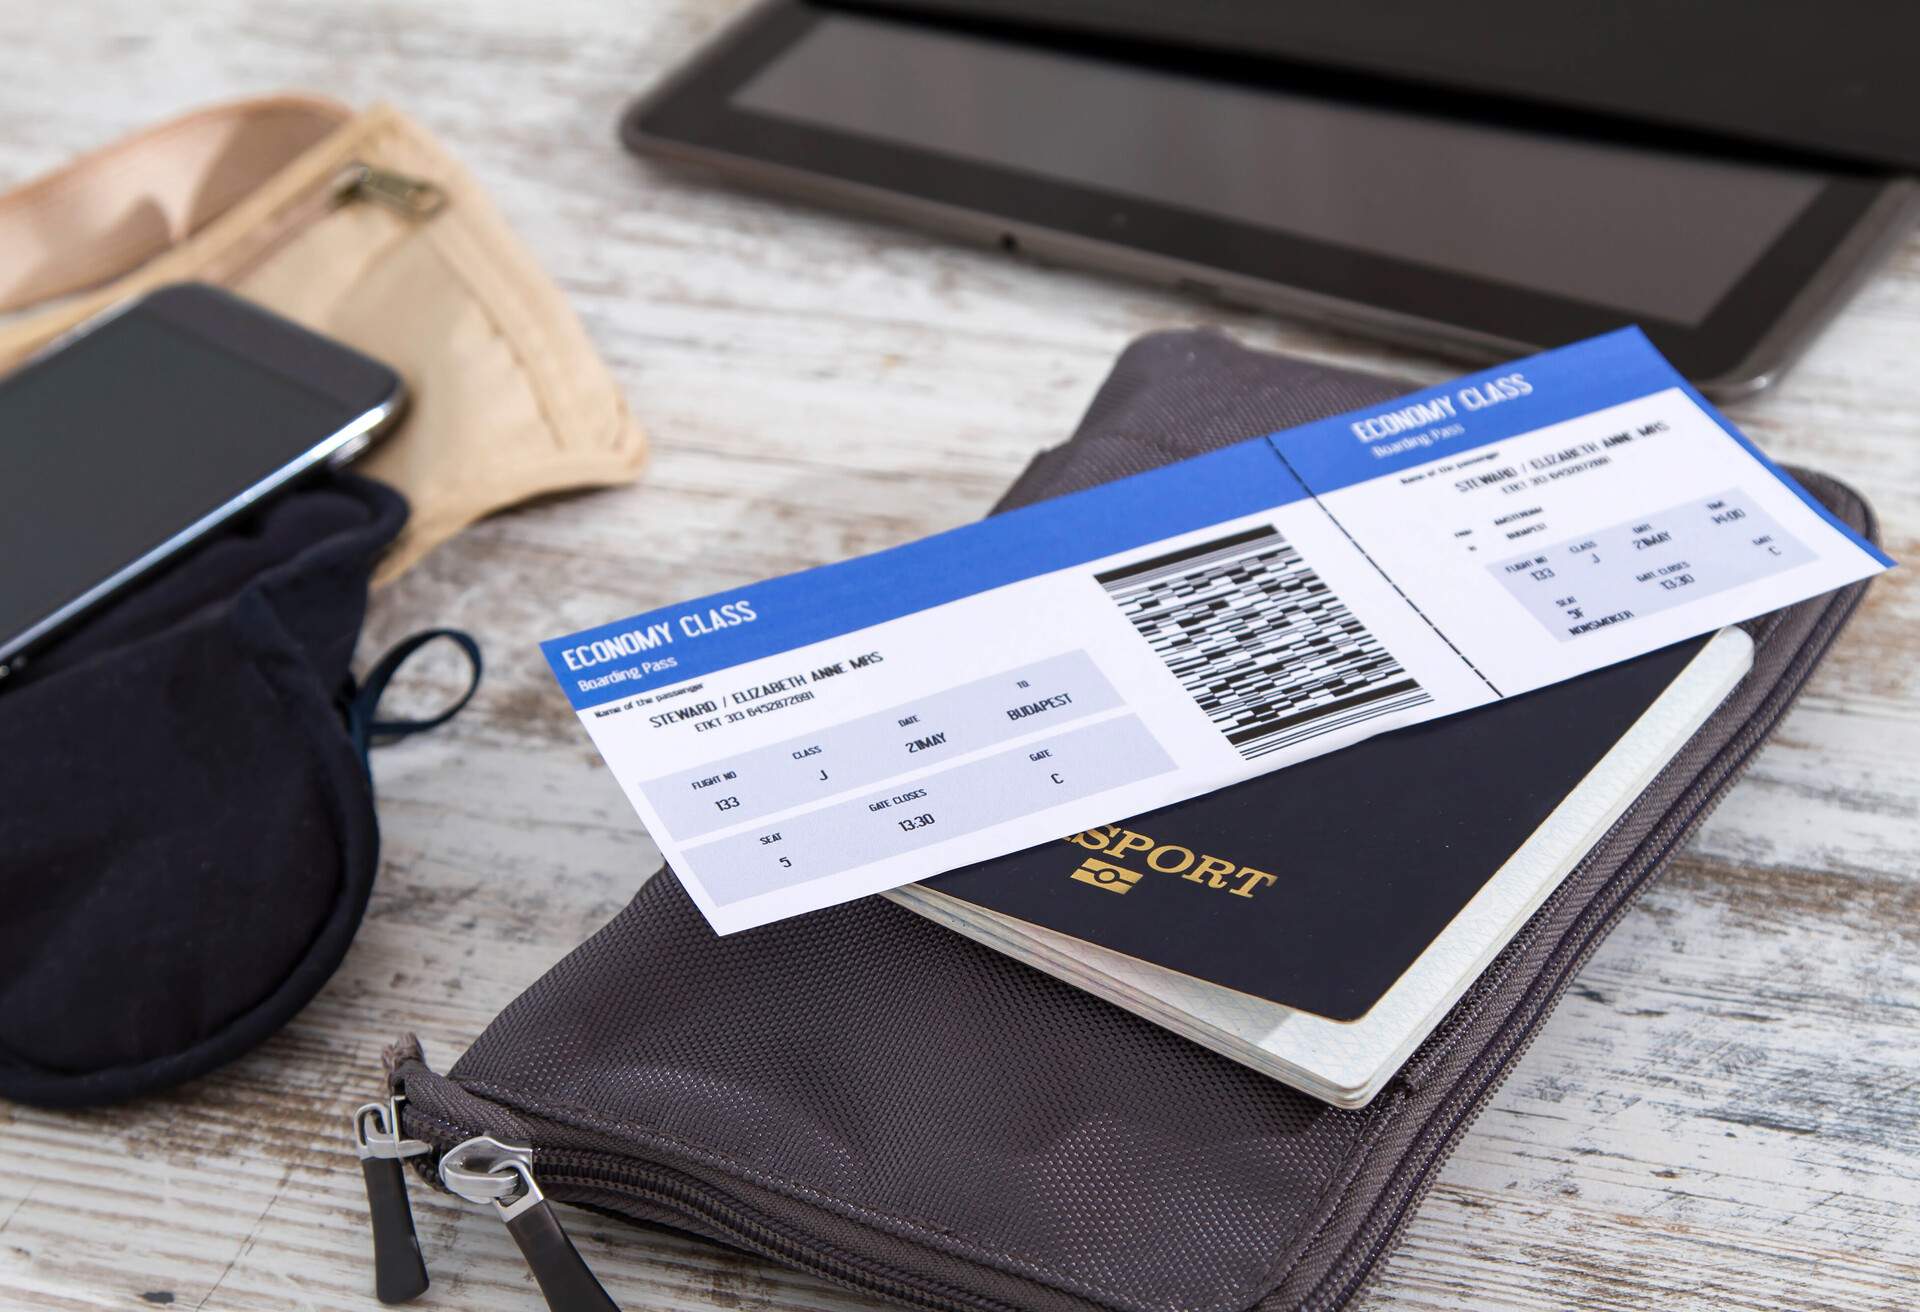 Airline ticket, passport and electronics, preparing to travel